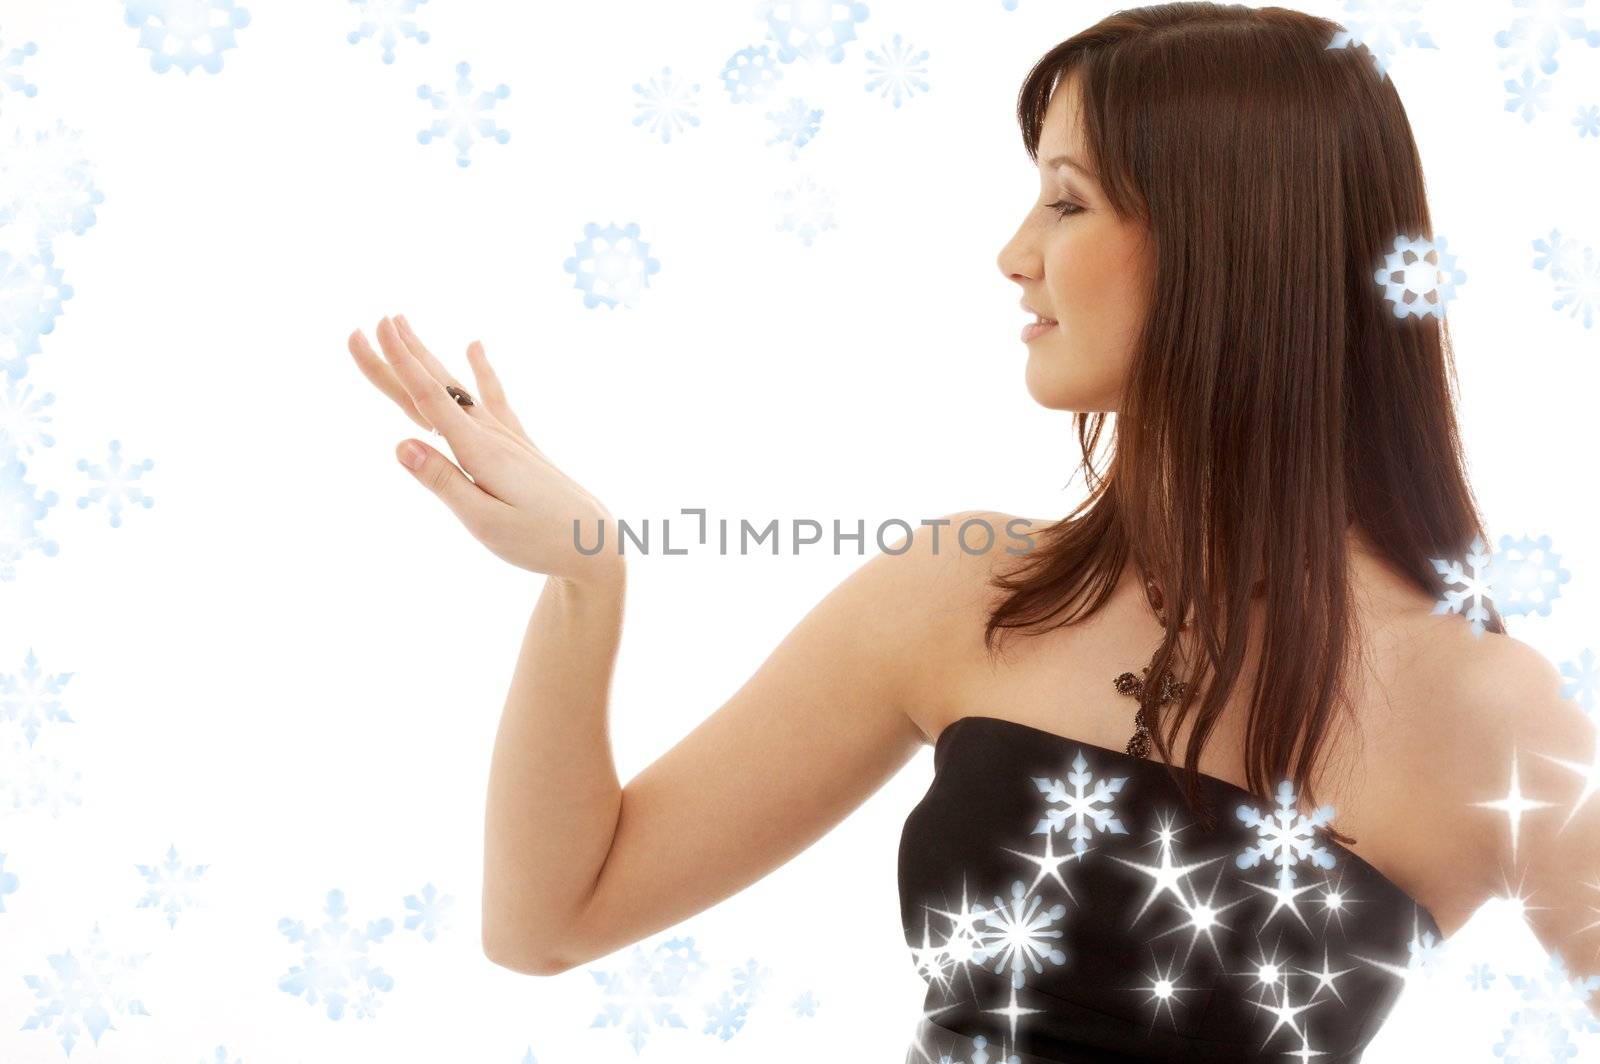 lovely brunette with engagement ring and snowflakes #2 by dolgachov